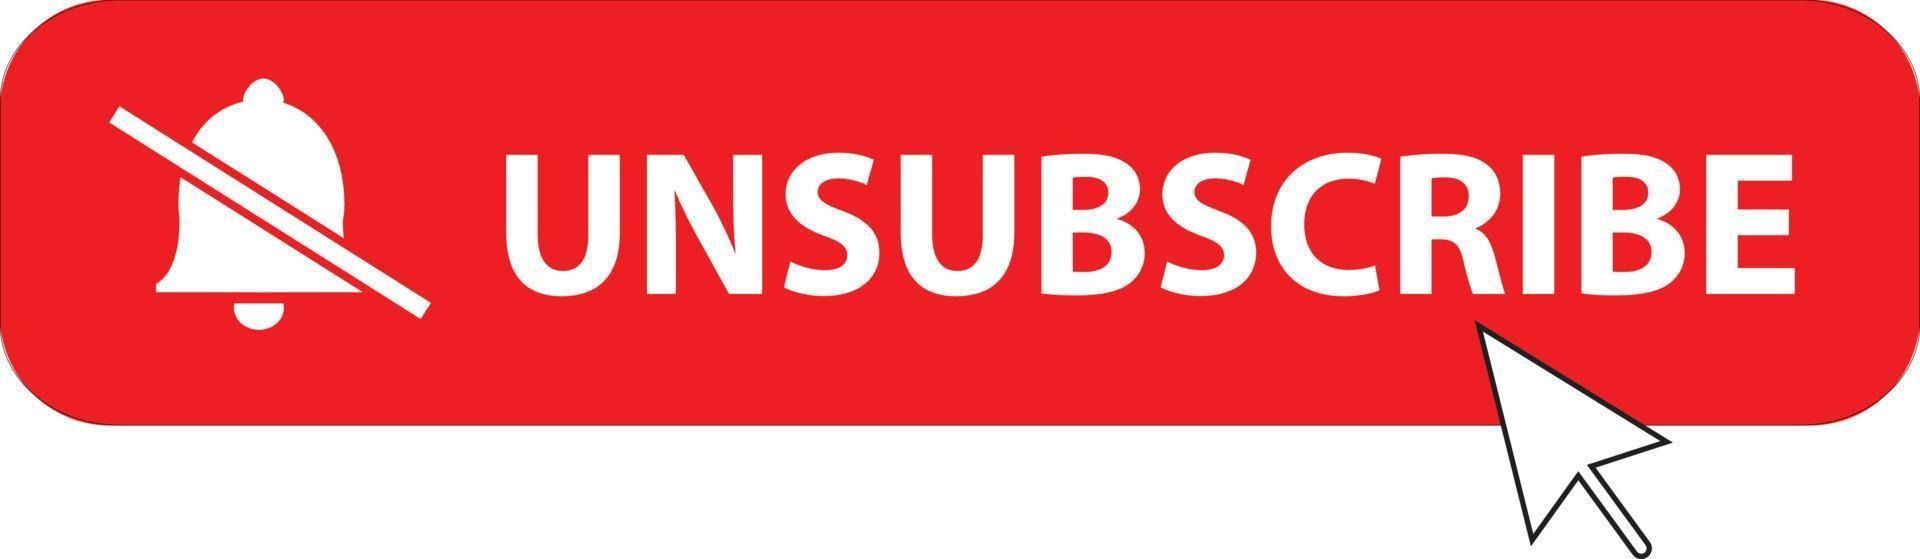 unsubscribe multiple emails Gmail